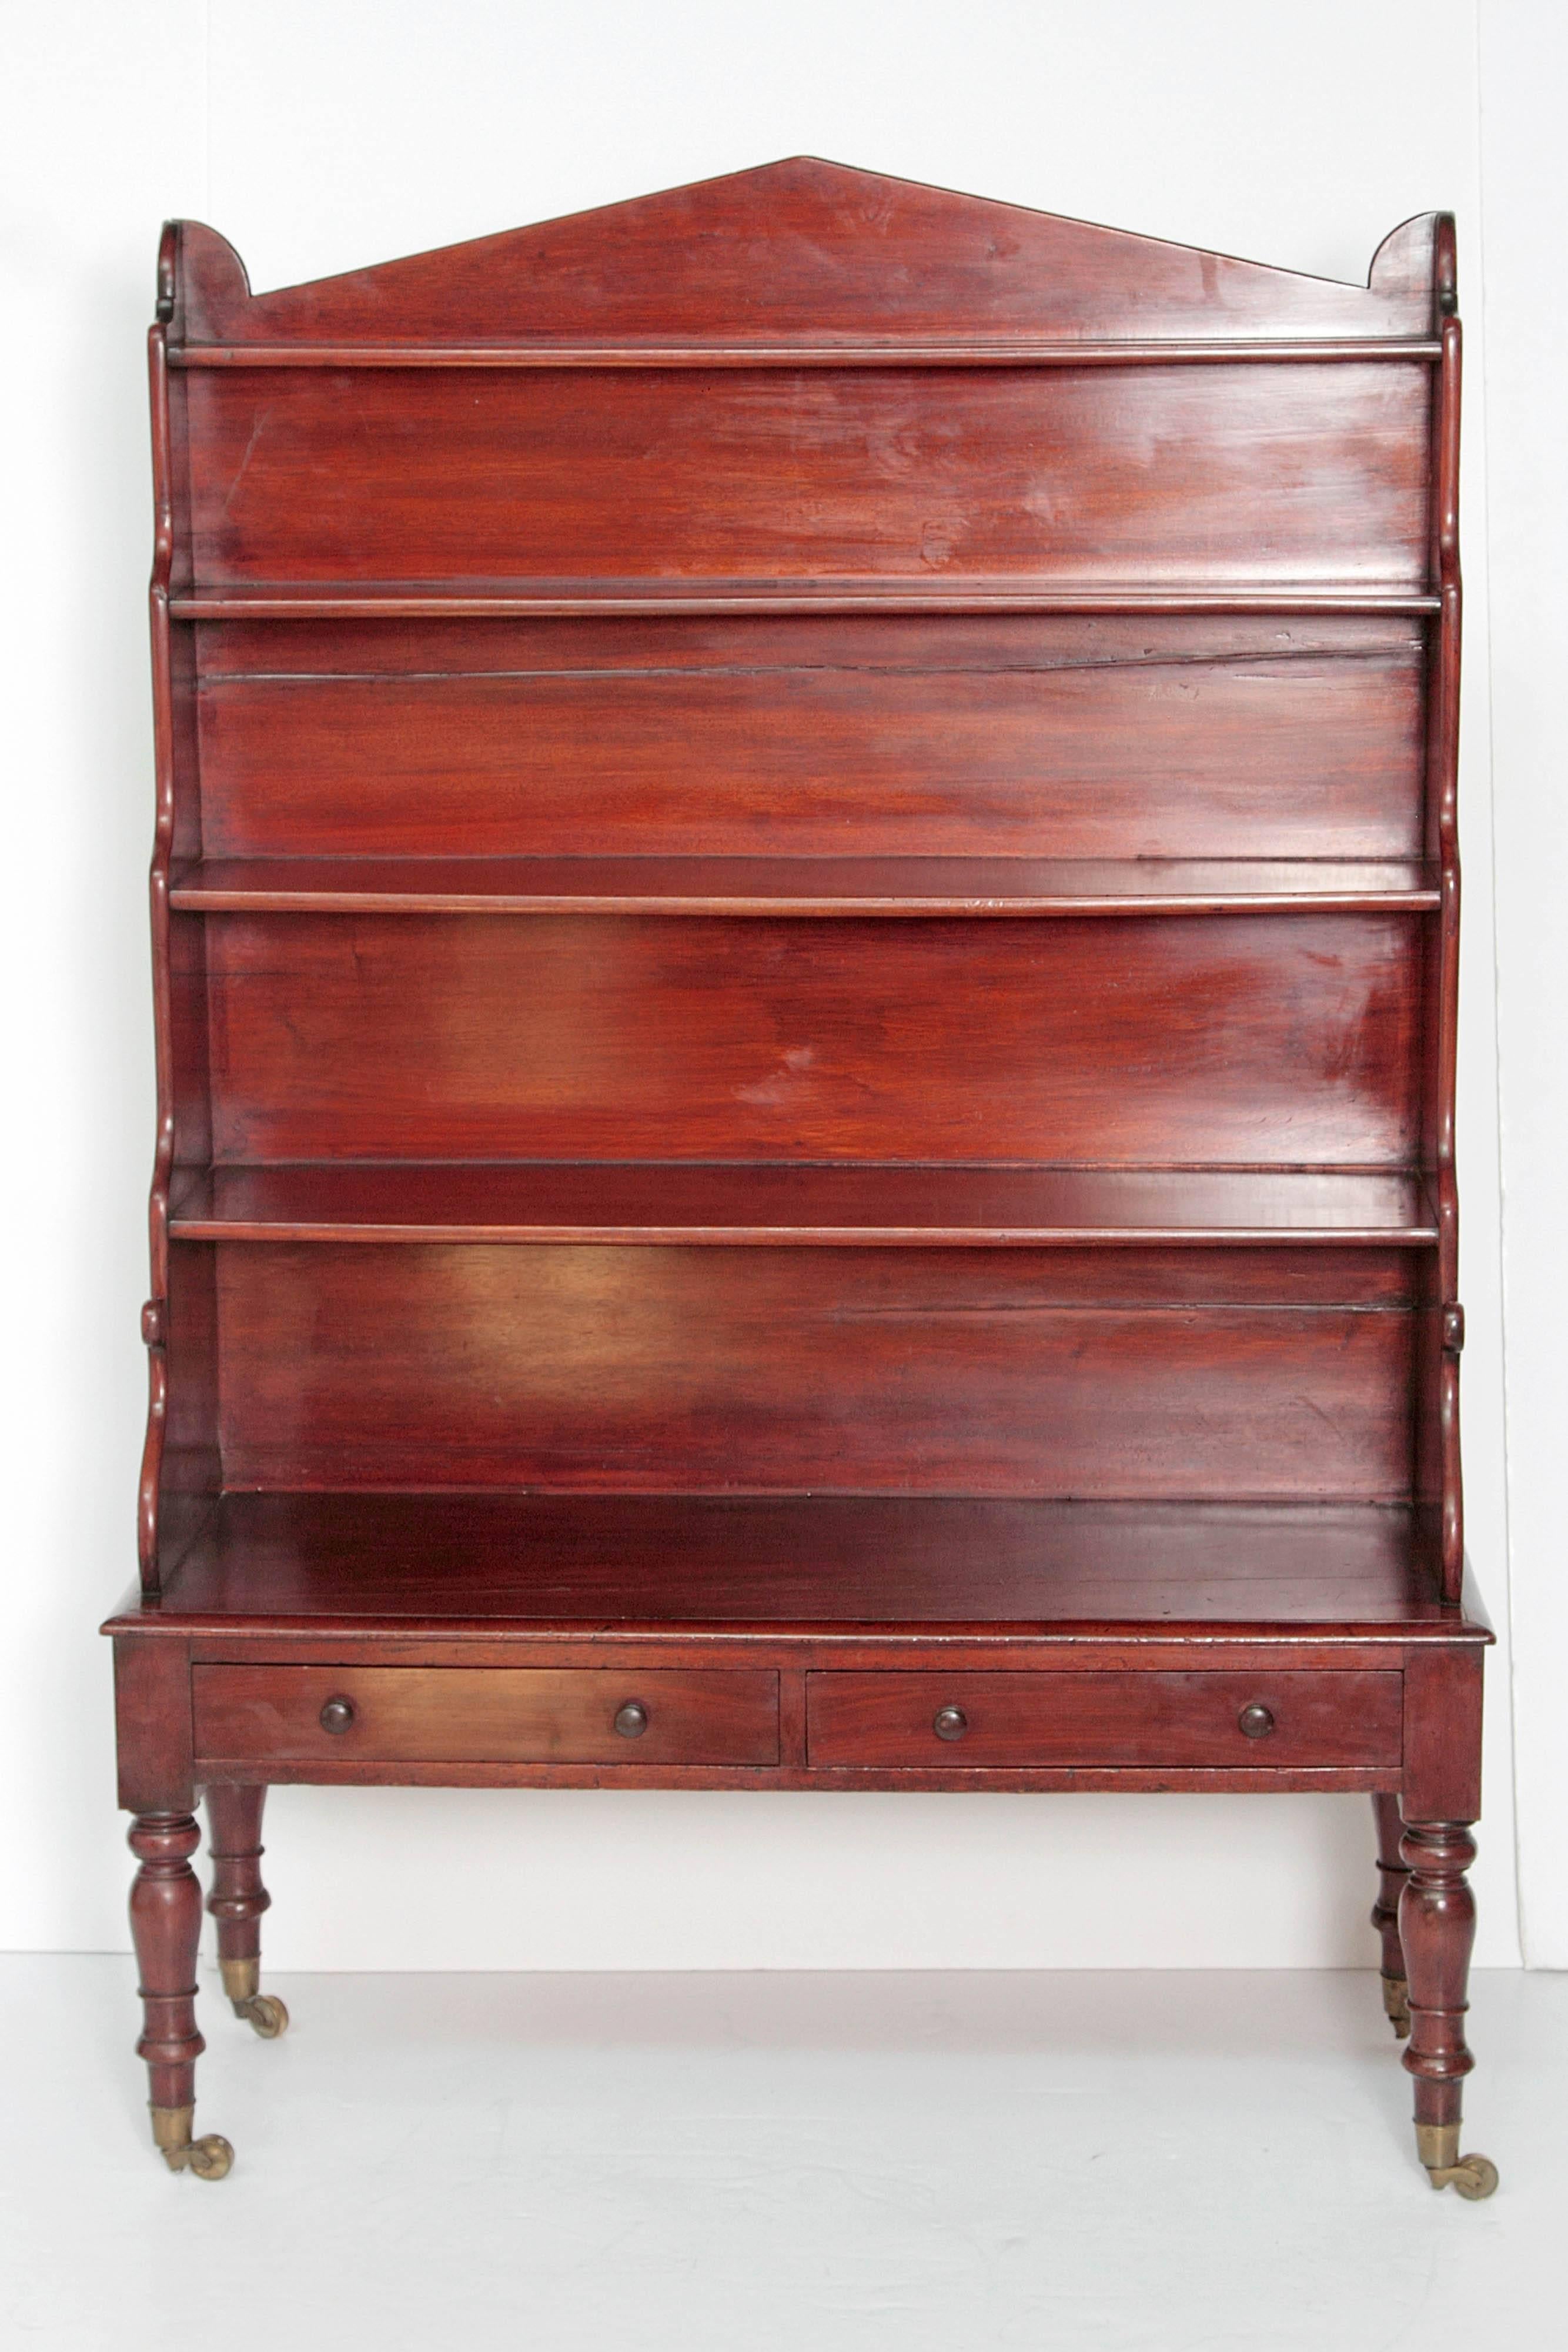 Period Regency
Dwarf Waterfall bookcases / etageres, pair
Manner of Gillows of Lancaster / London
each with two (2) drawers
mahogany case with turned mahogany legs with brass castors 
English, circa 1820.

Measures: 62.75